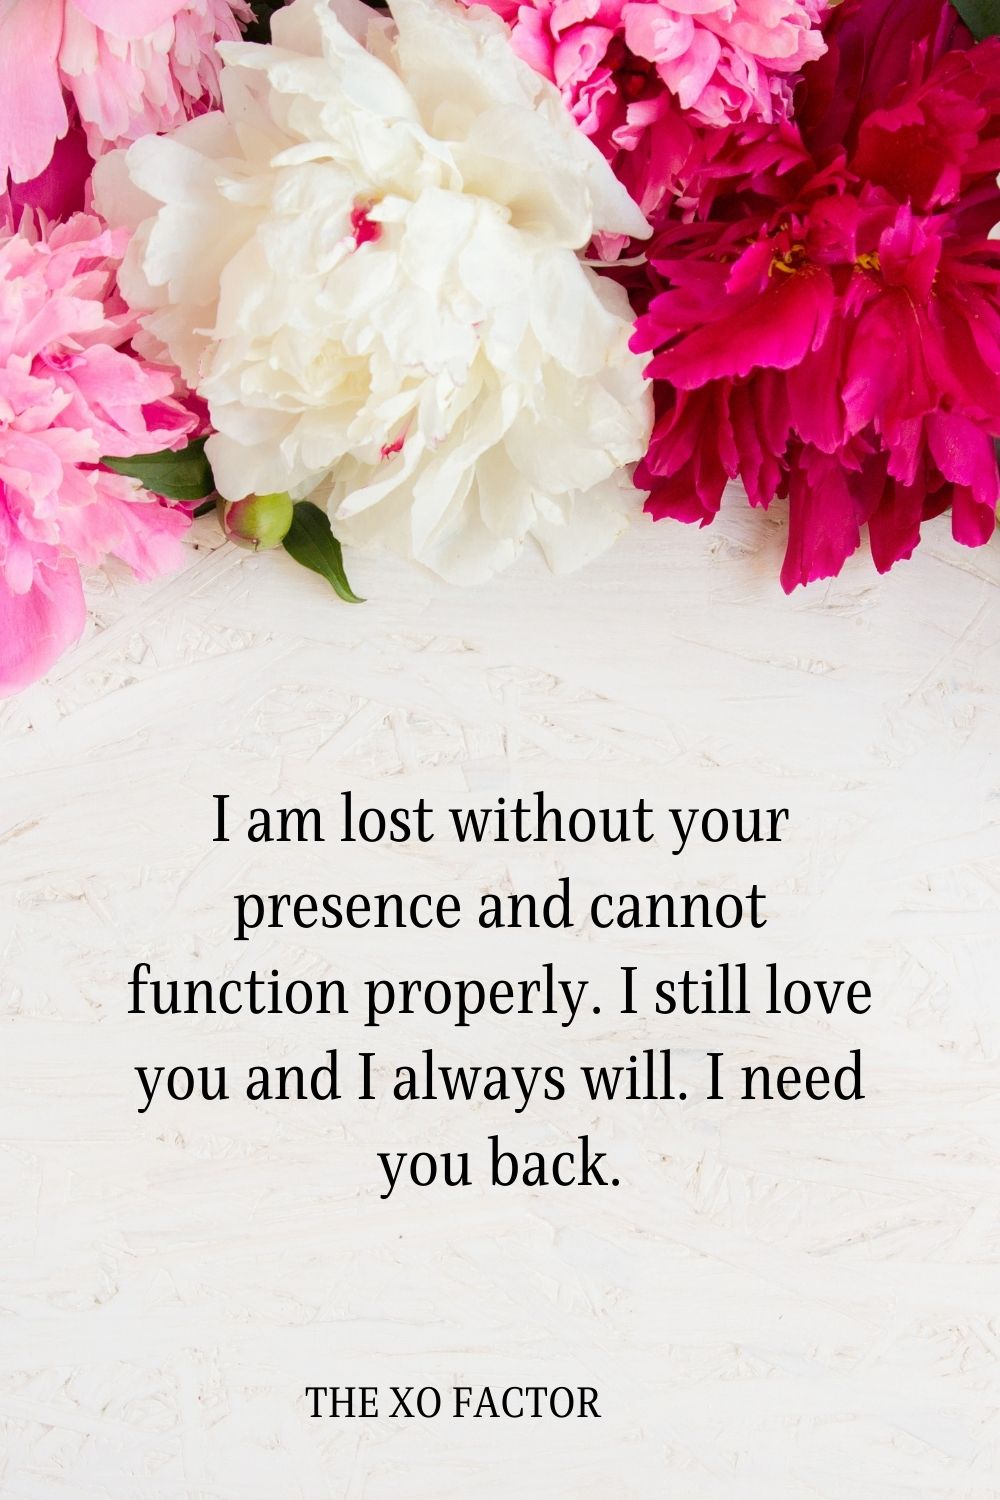 I am lost without your presence and cannot function properly. I still love you and I always will. I need you back.